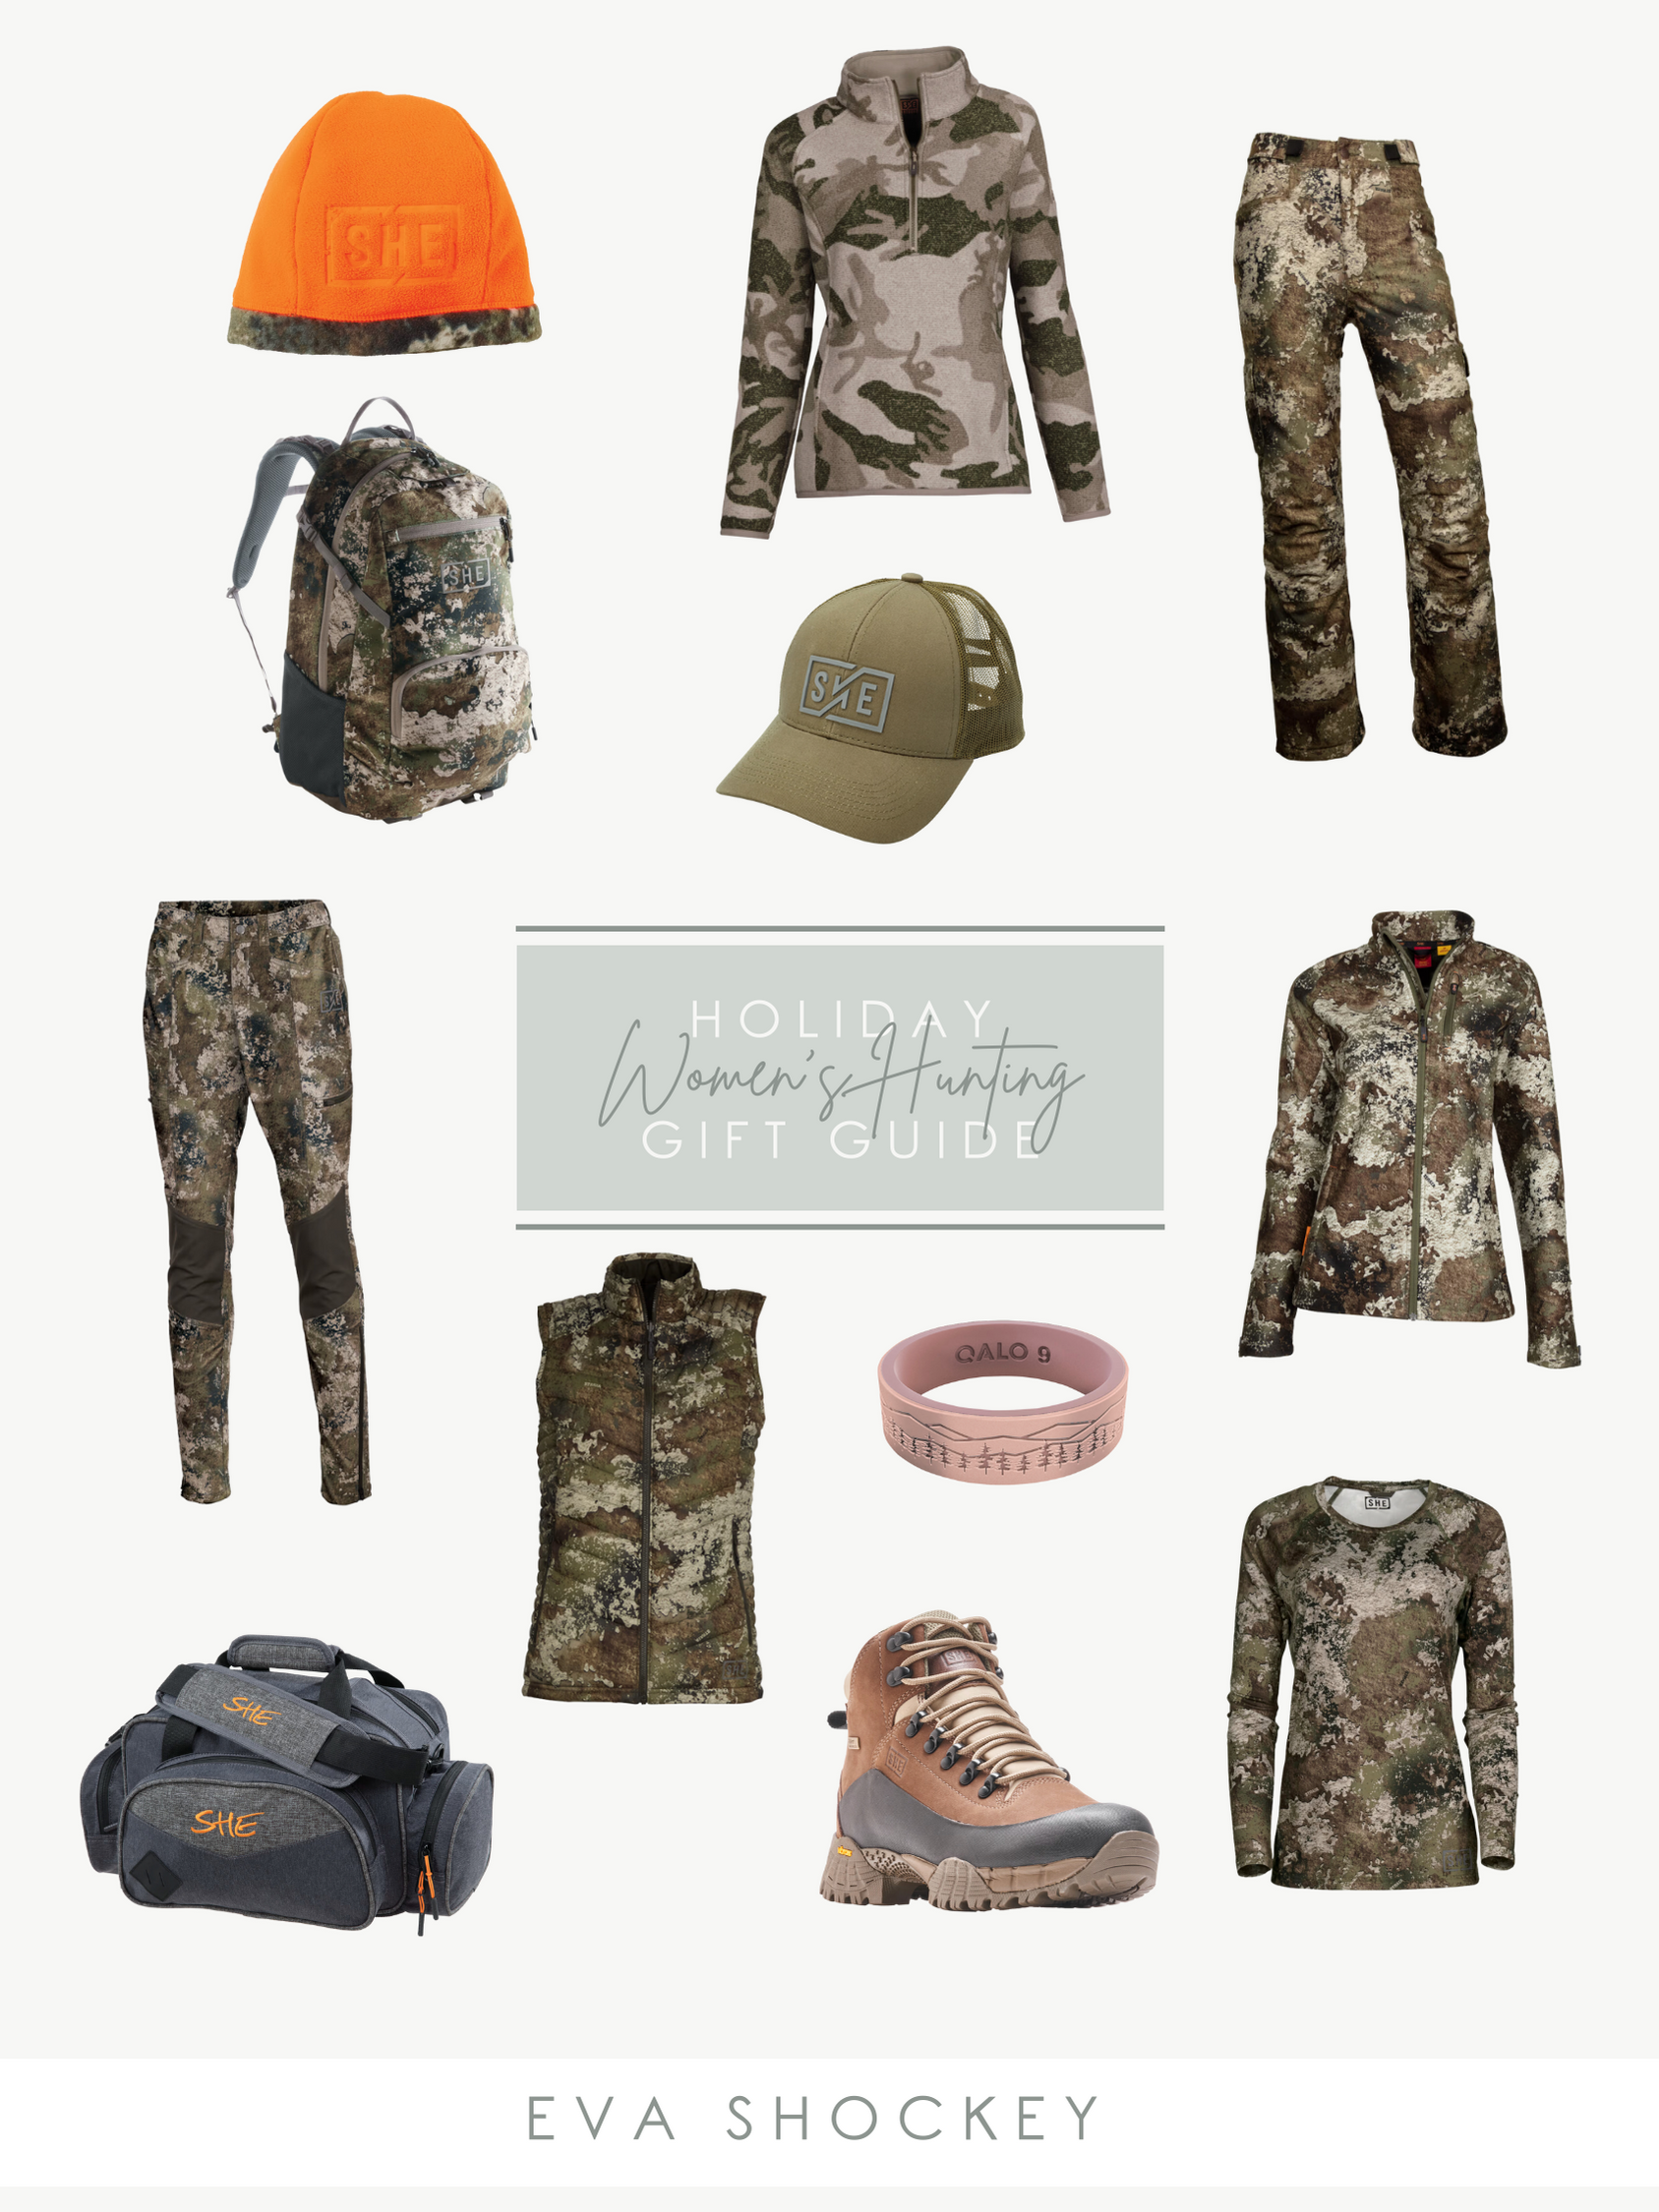 SHE Outdoor Hunting Pack